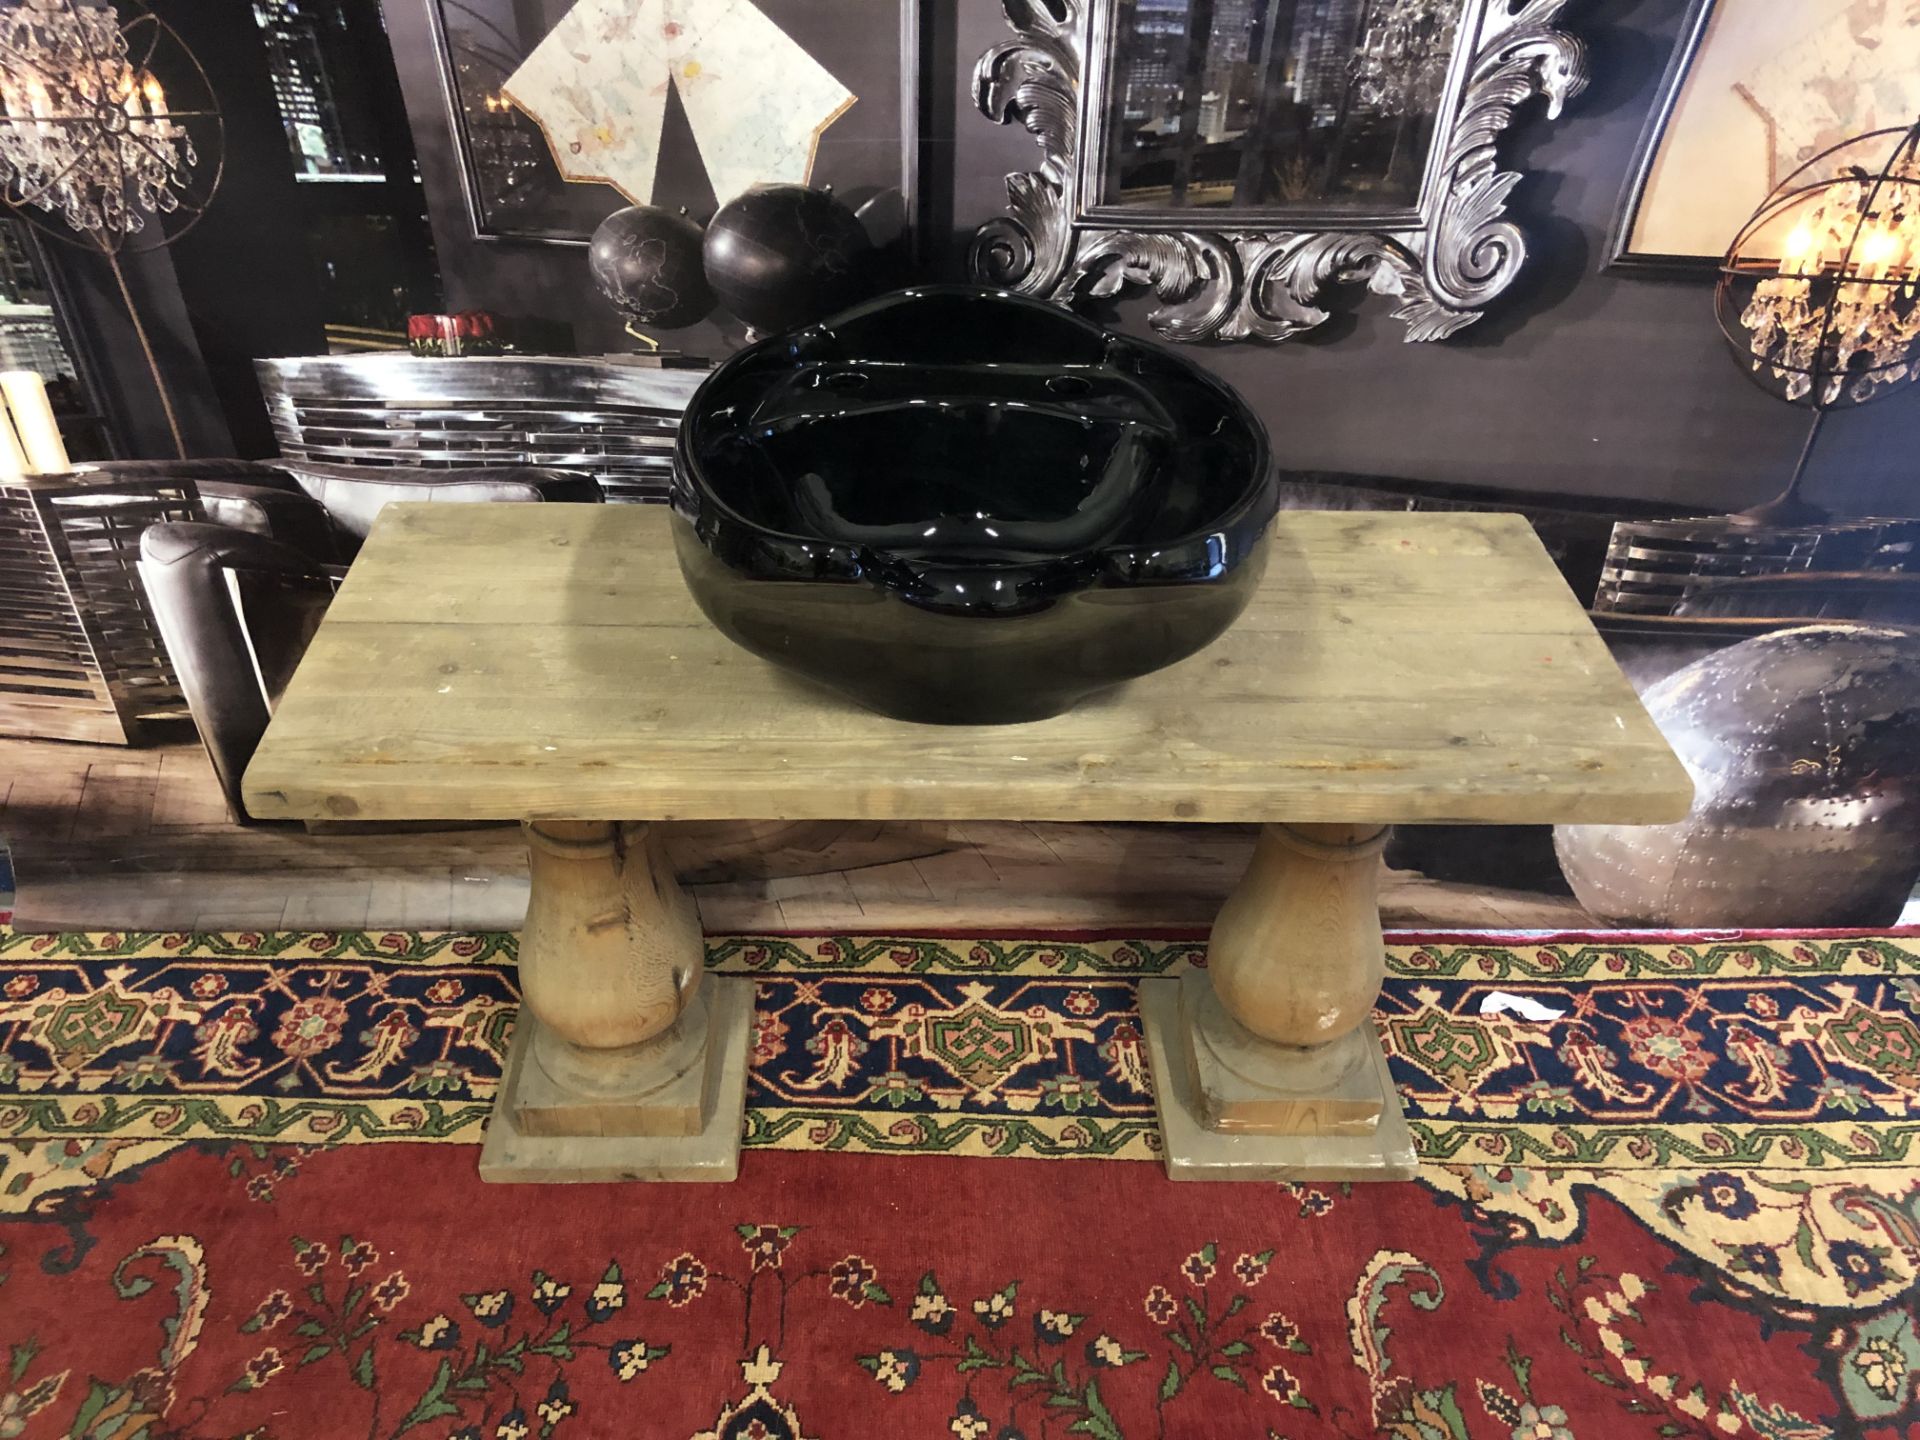 Architectural Rustic Table Genuine English Reclaimed Timber With Marble Salon Sink Inset Genuine - Image 2 of 3